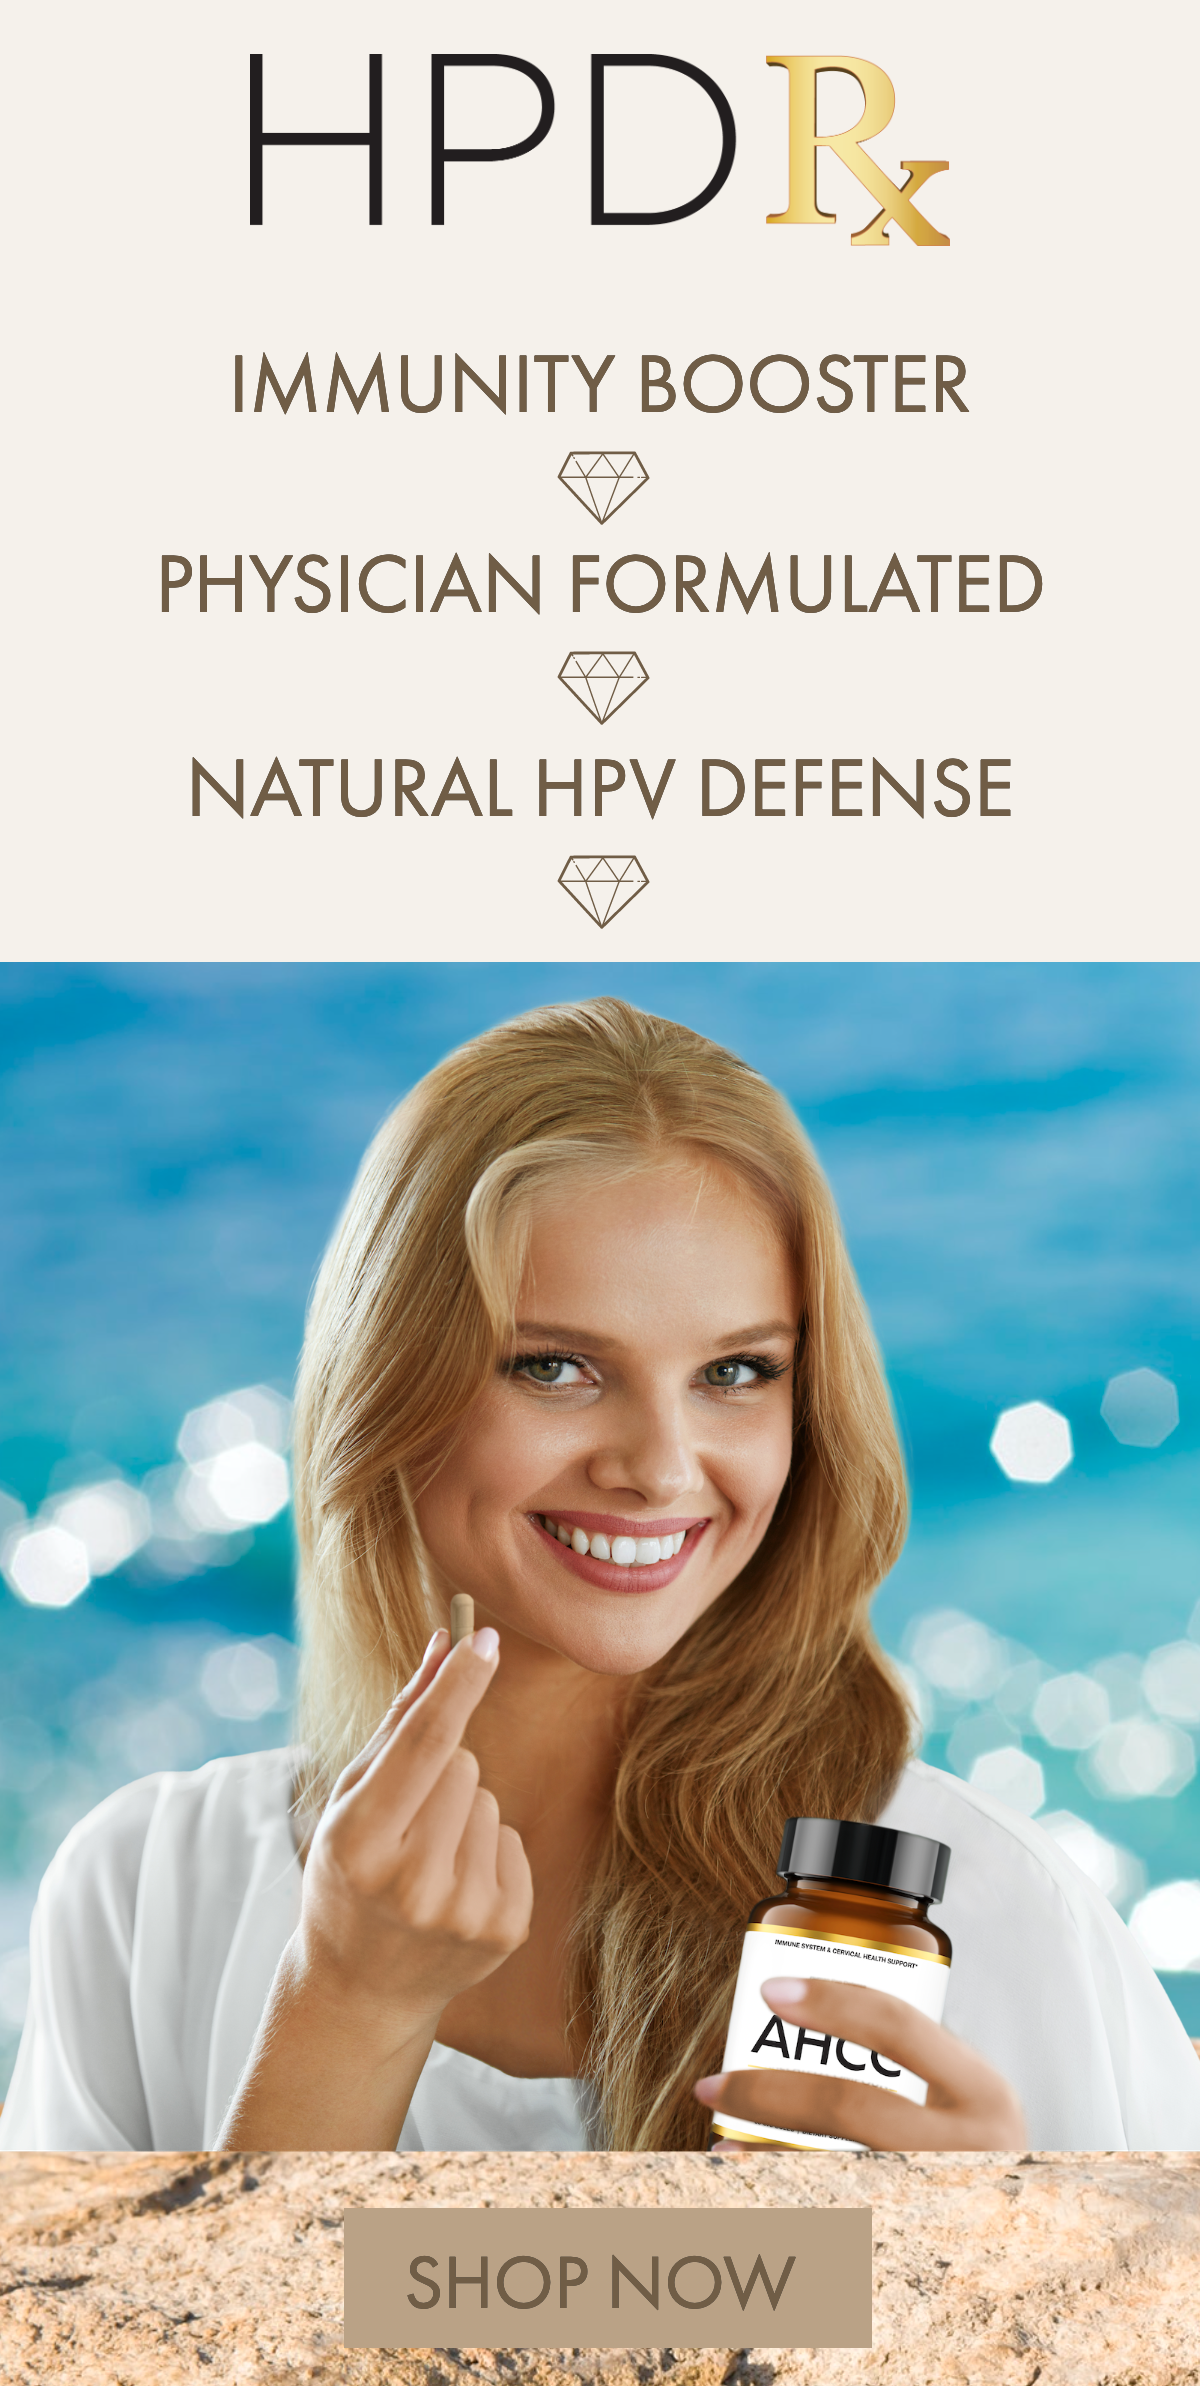 HPDRx - Immunity Booster, Physician Formulated, Natural HPV Defense